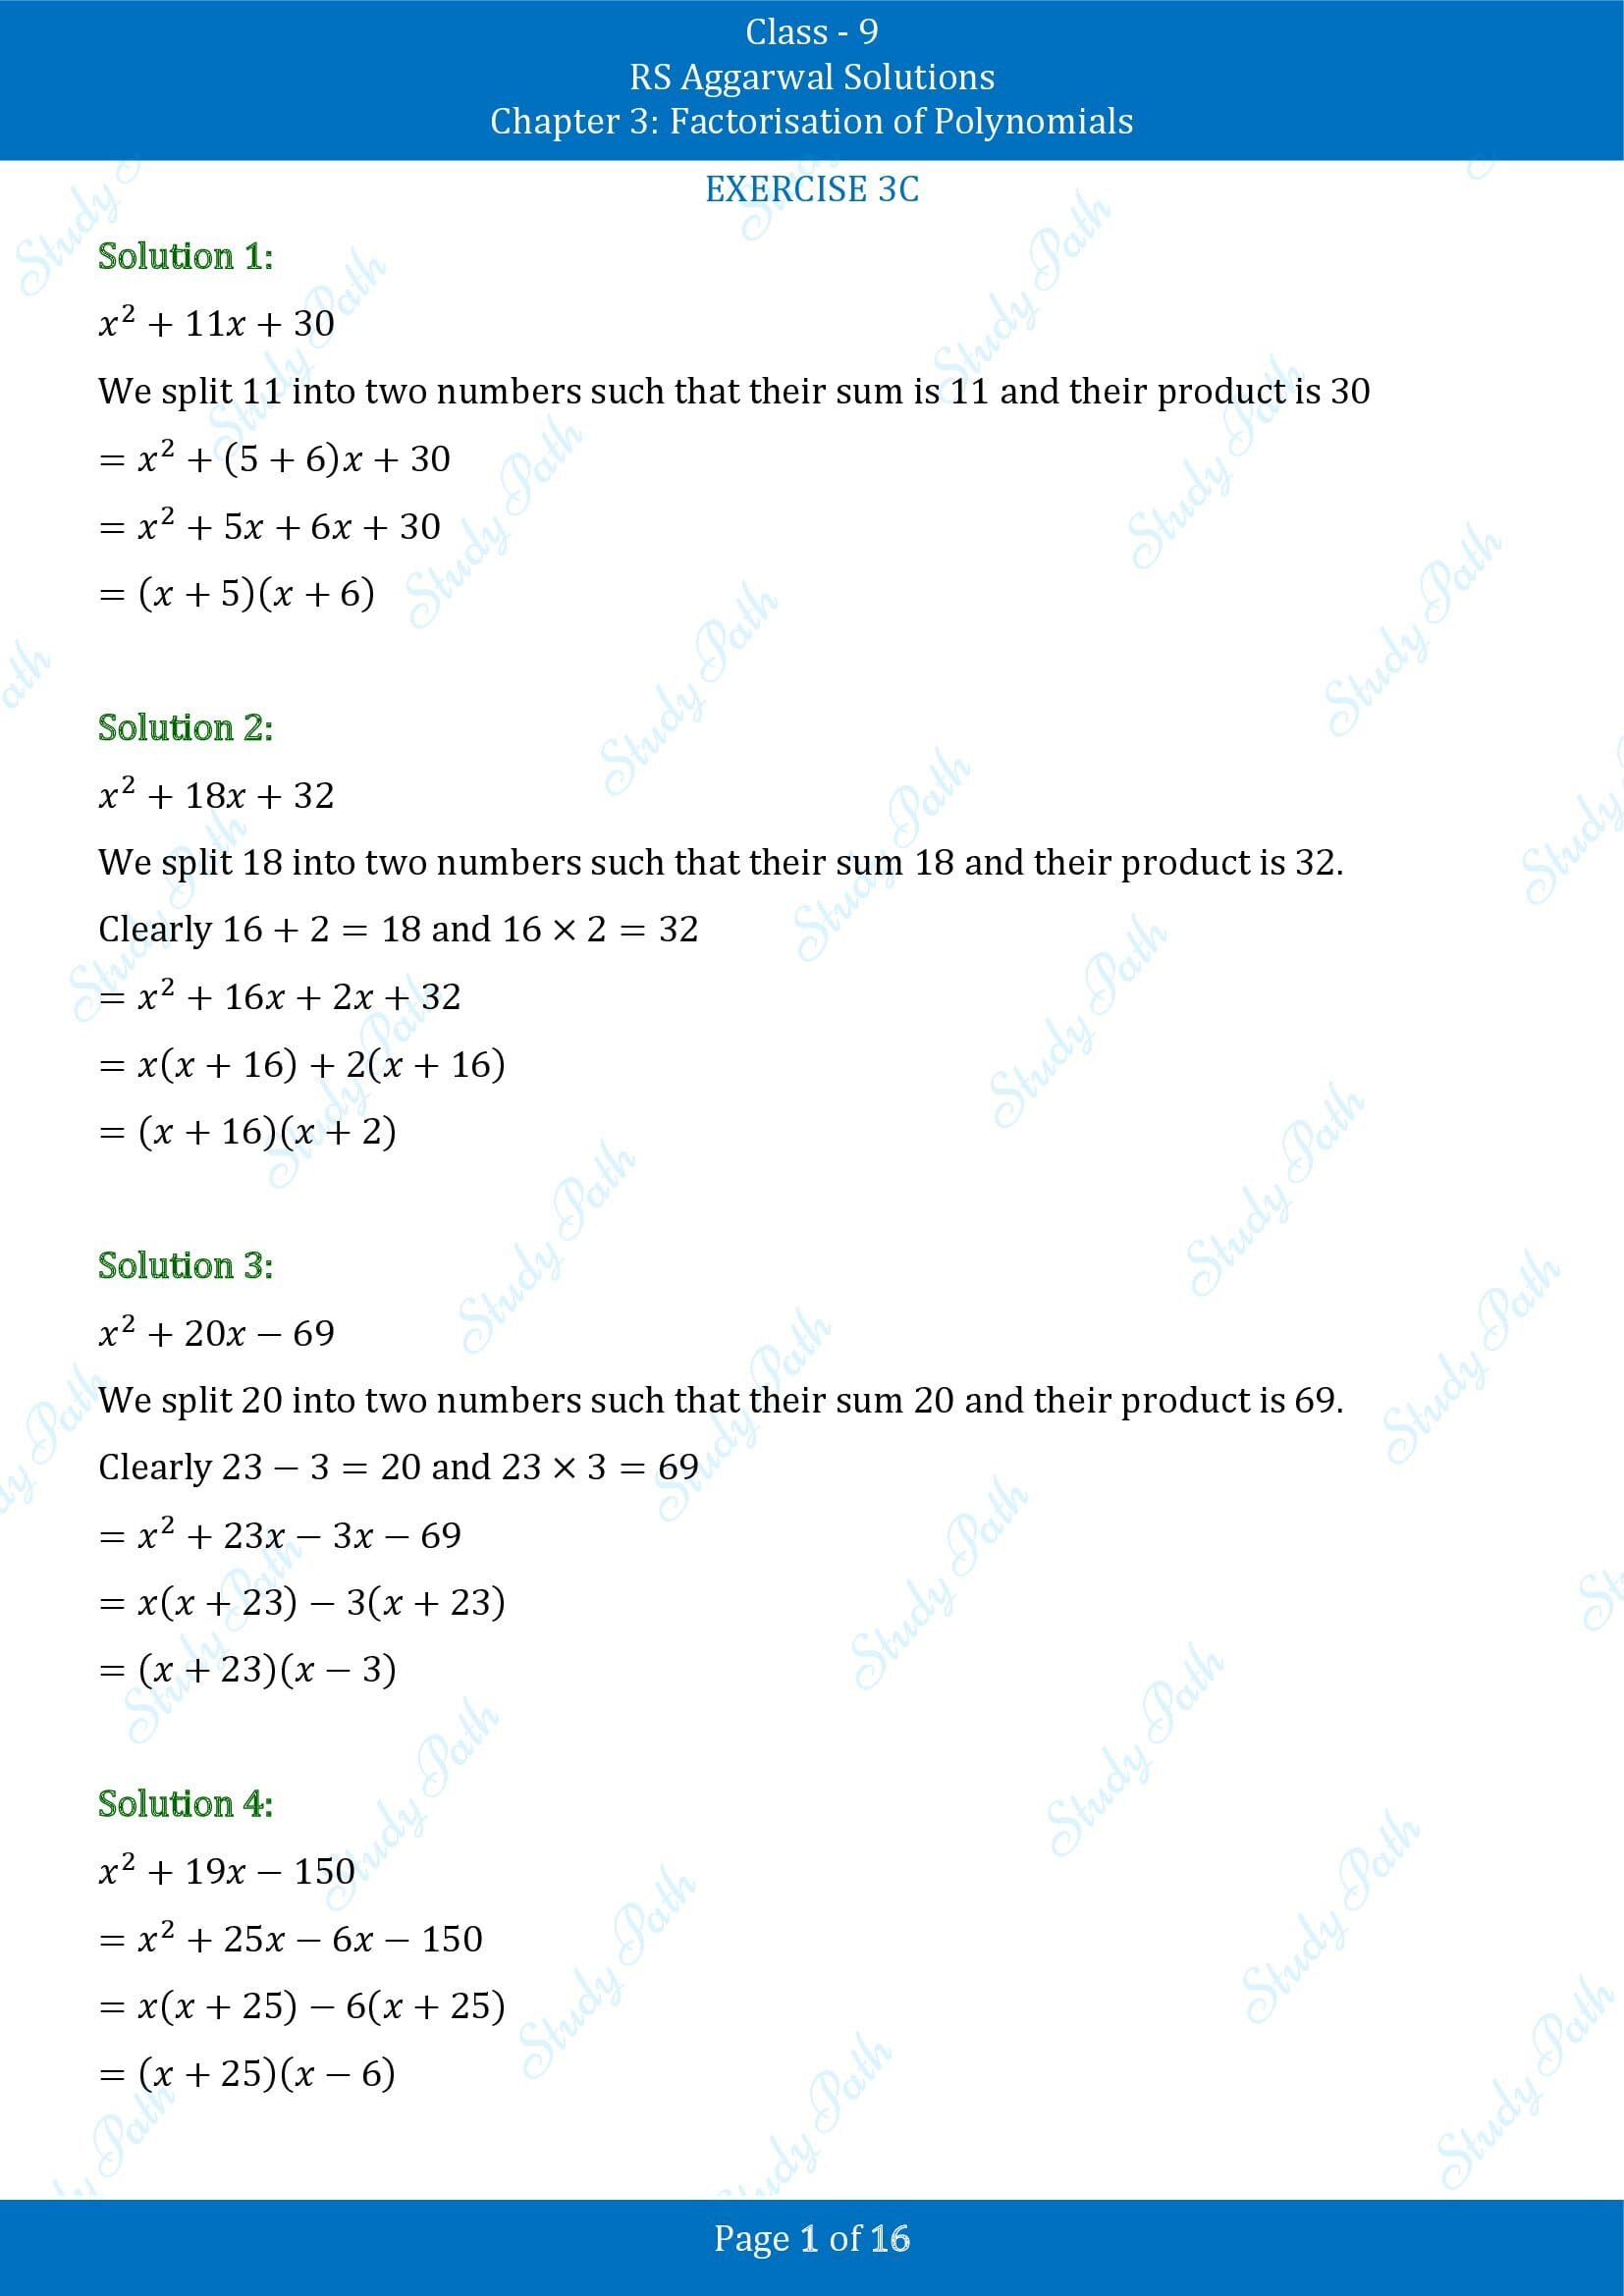 RS Aggarwal Solutions Class 9 Chapter 3 Factorisation of Polynomials Exercise 3C 00001